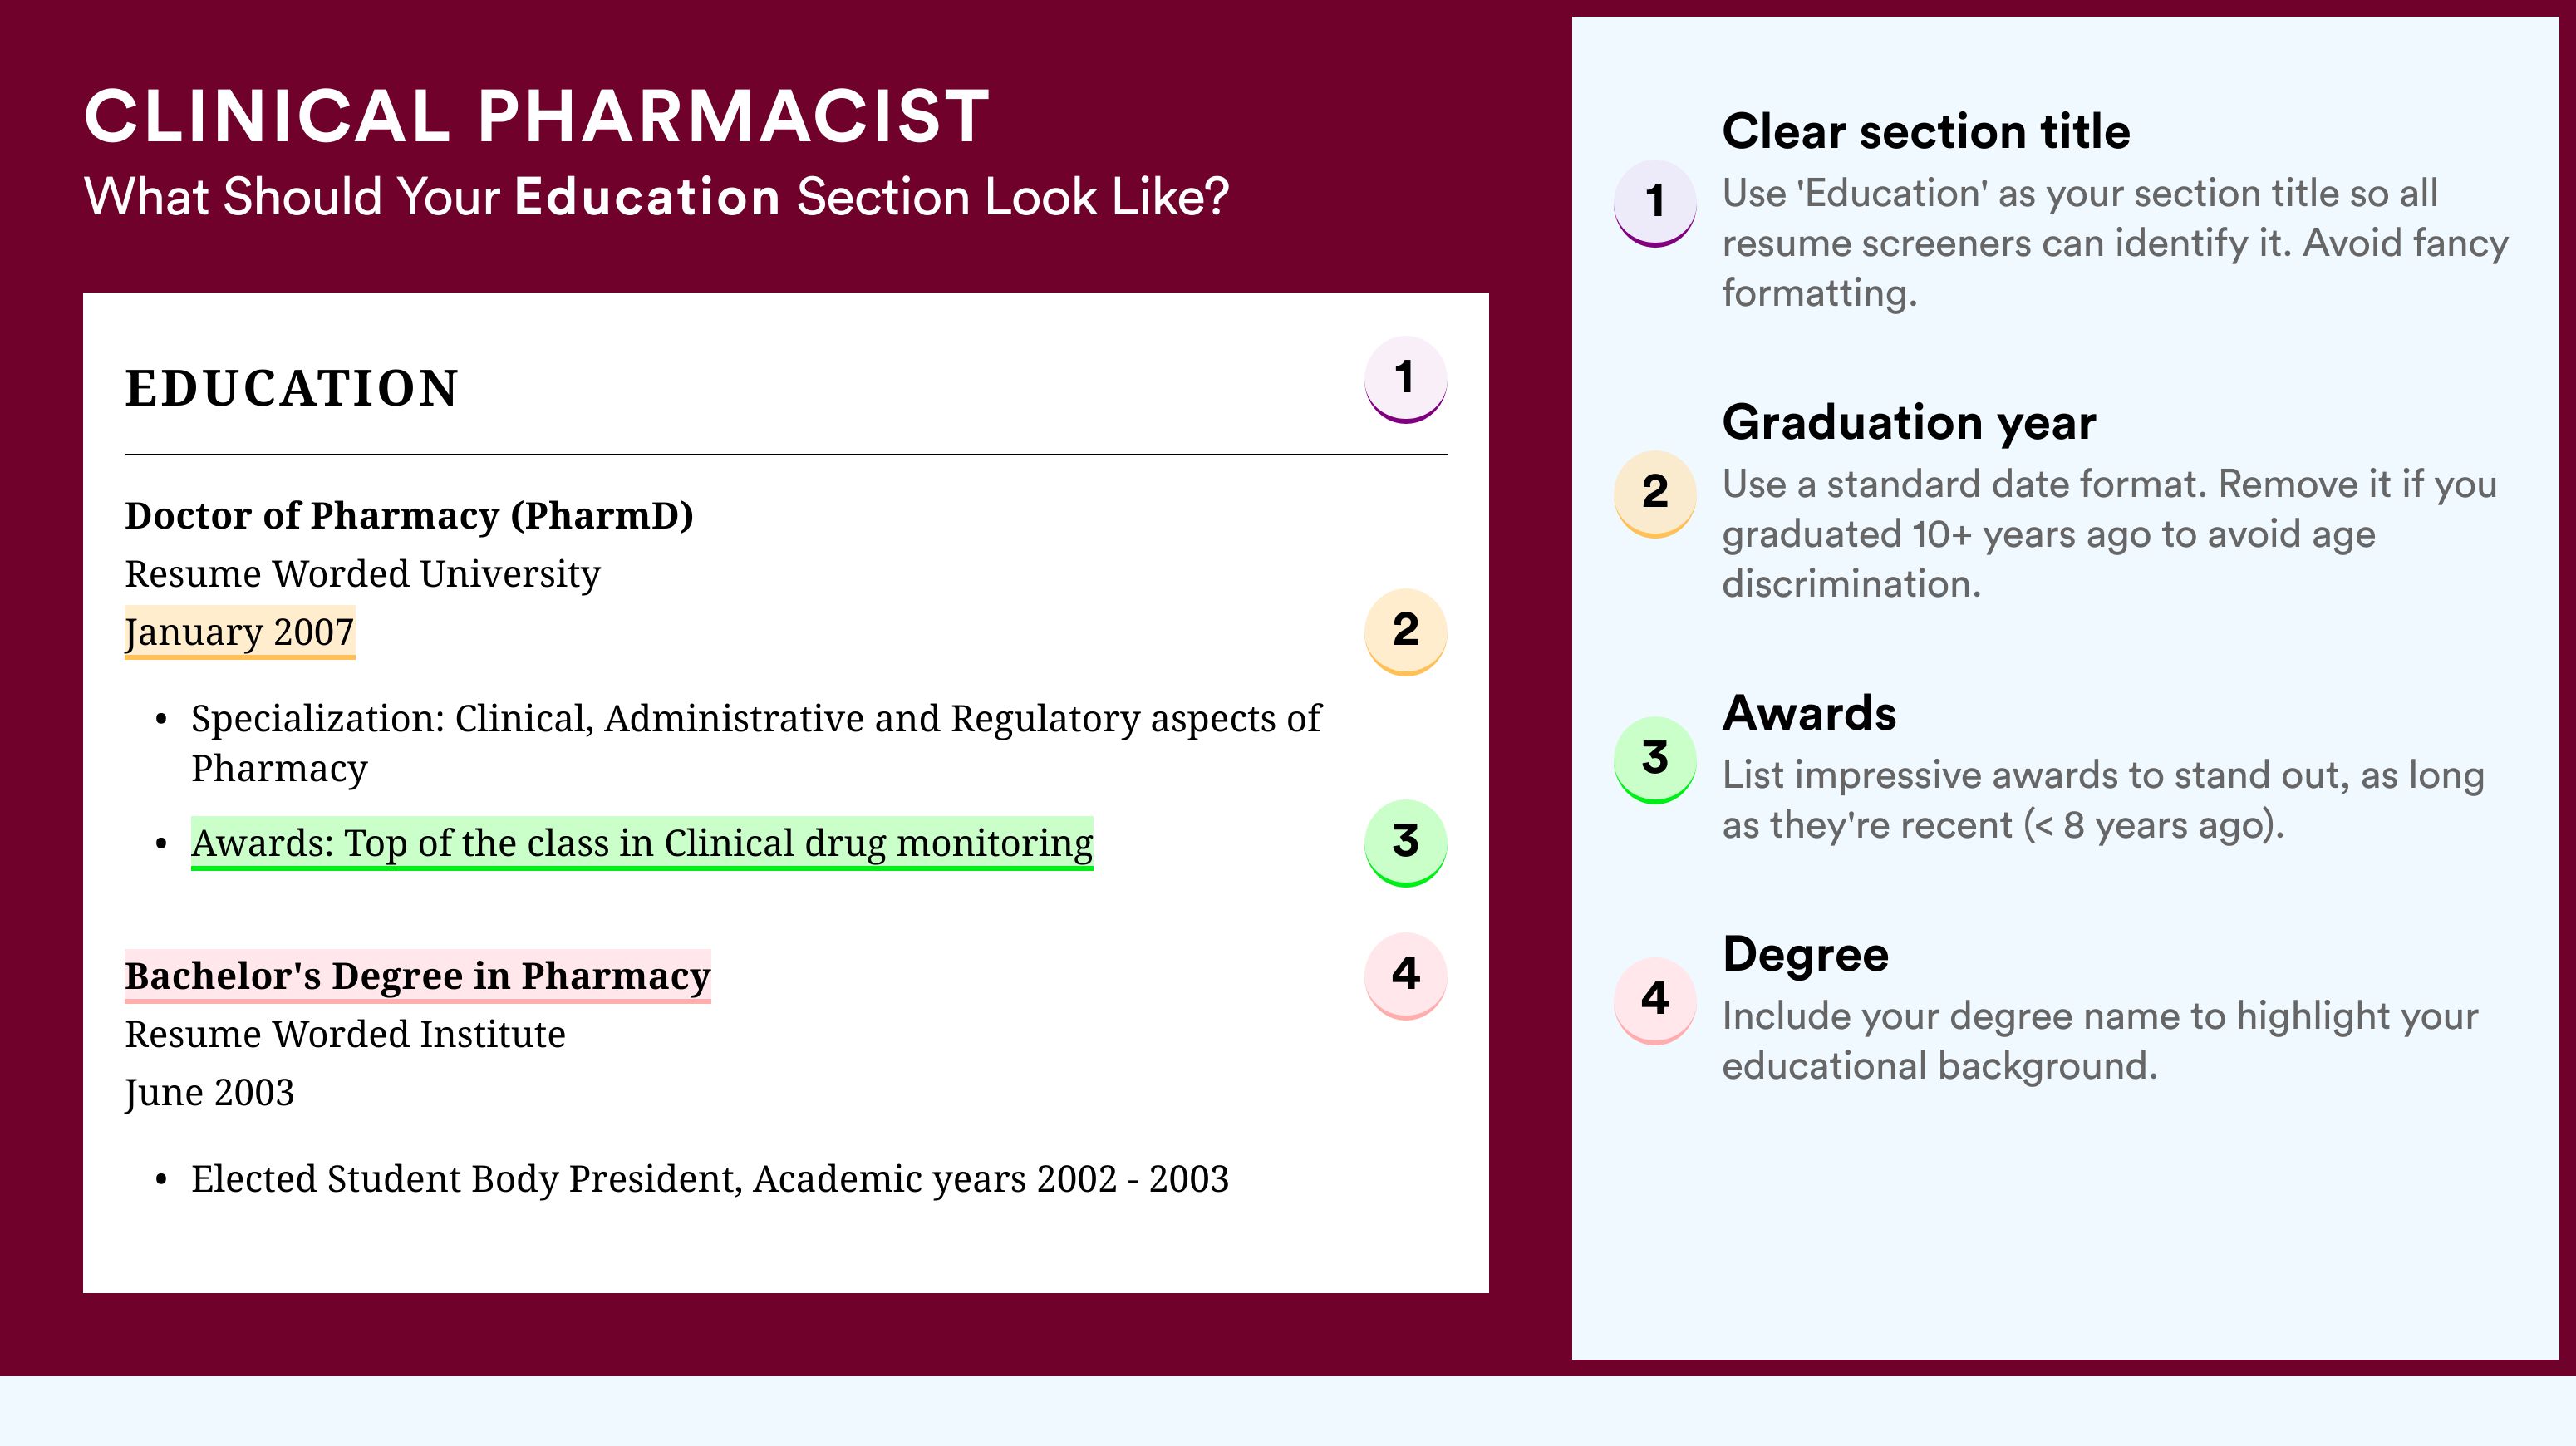 How To Write An Education Section - Clinical Pharmacist Roles